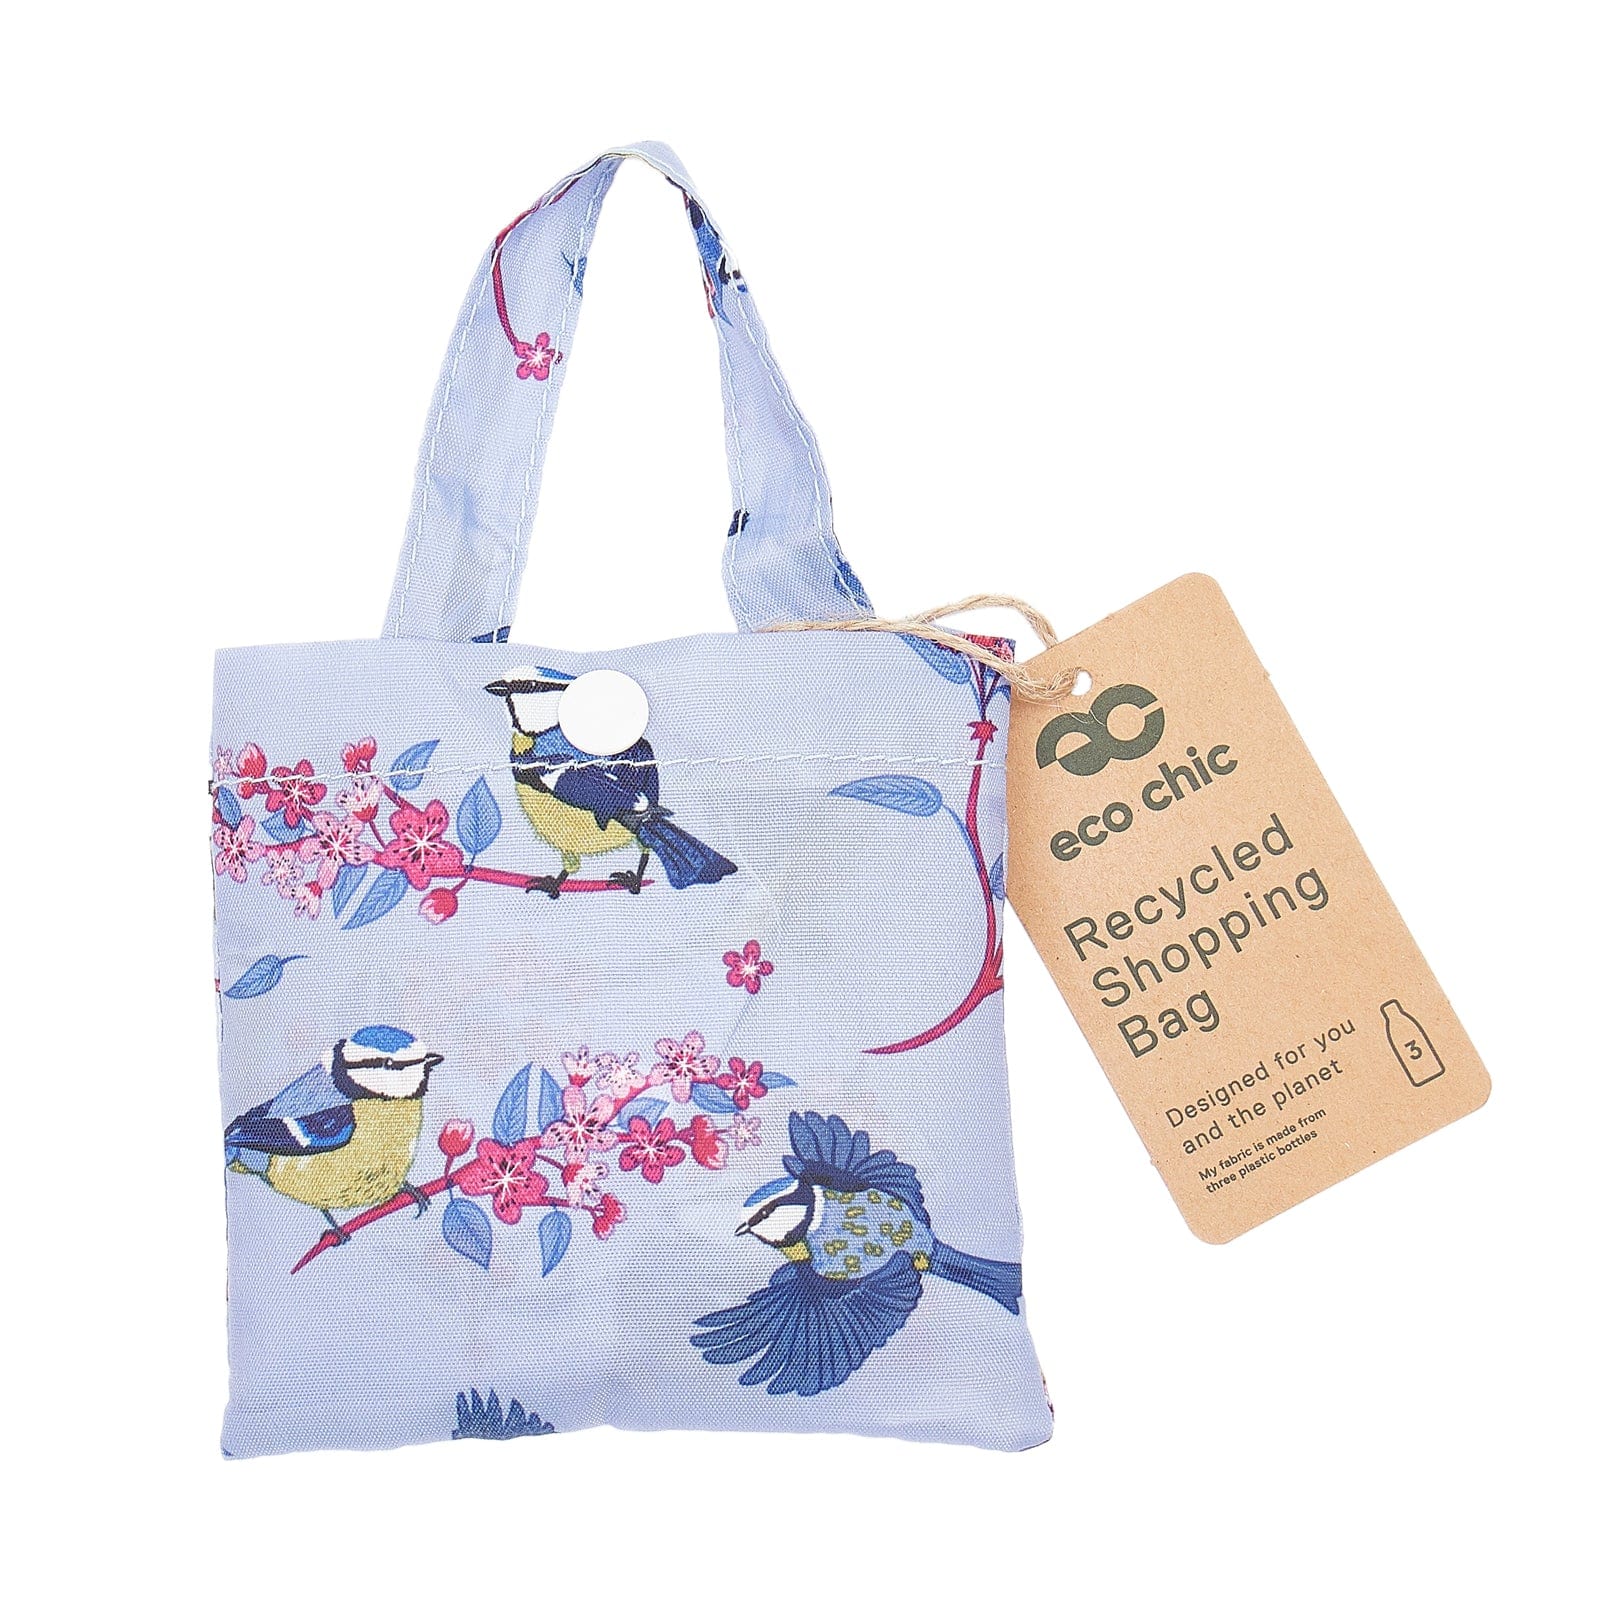 Eco Chic Eco Chic Lightweight Foldable Reusable Shopping Bag Blue Tits